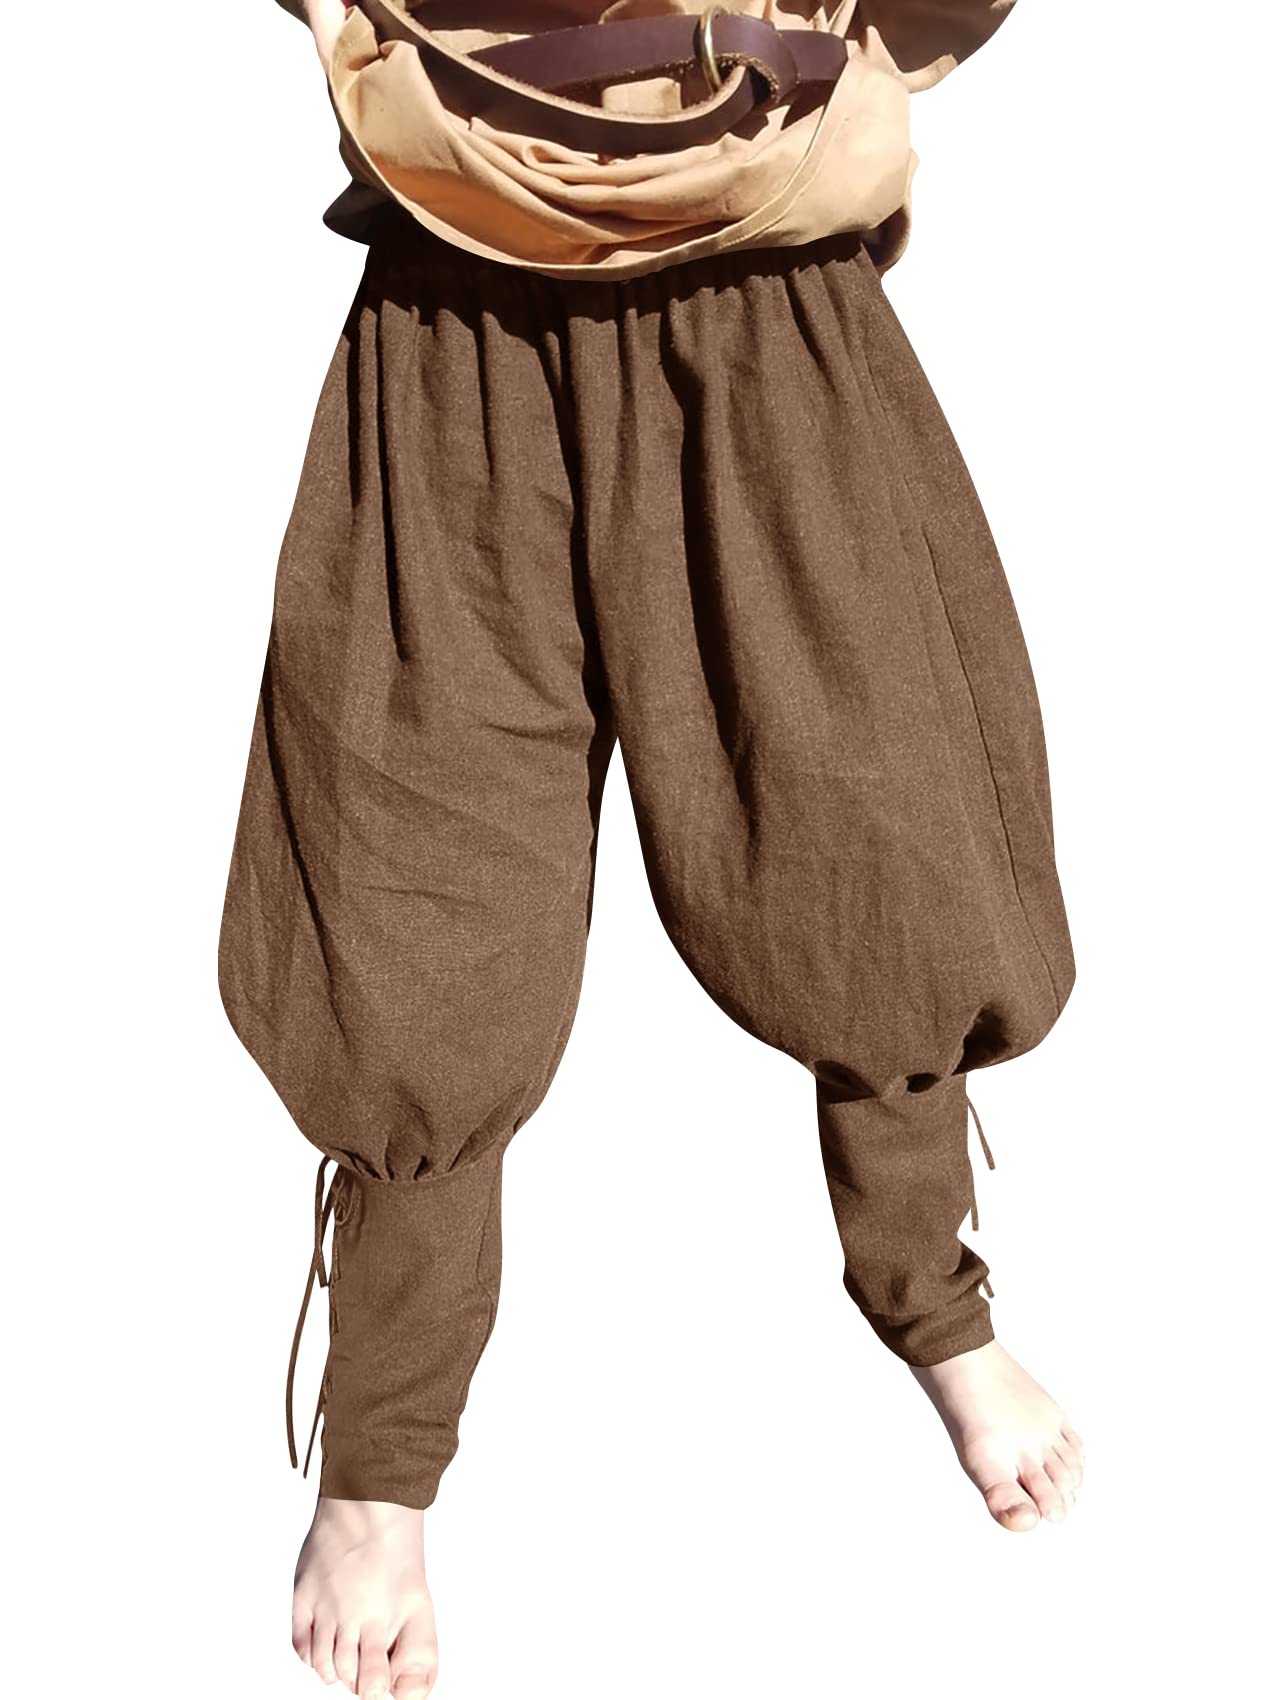 Gafeng Kids Boys Pirate Pants Medieval Renaissance Viking Costume Linen Halloween Cosplay Trousers 10-12 Years Gray